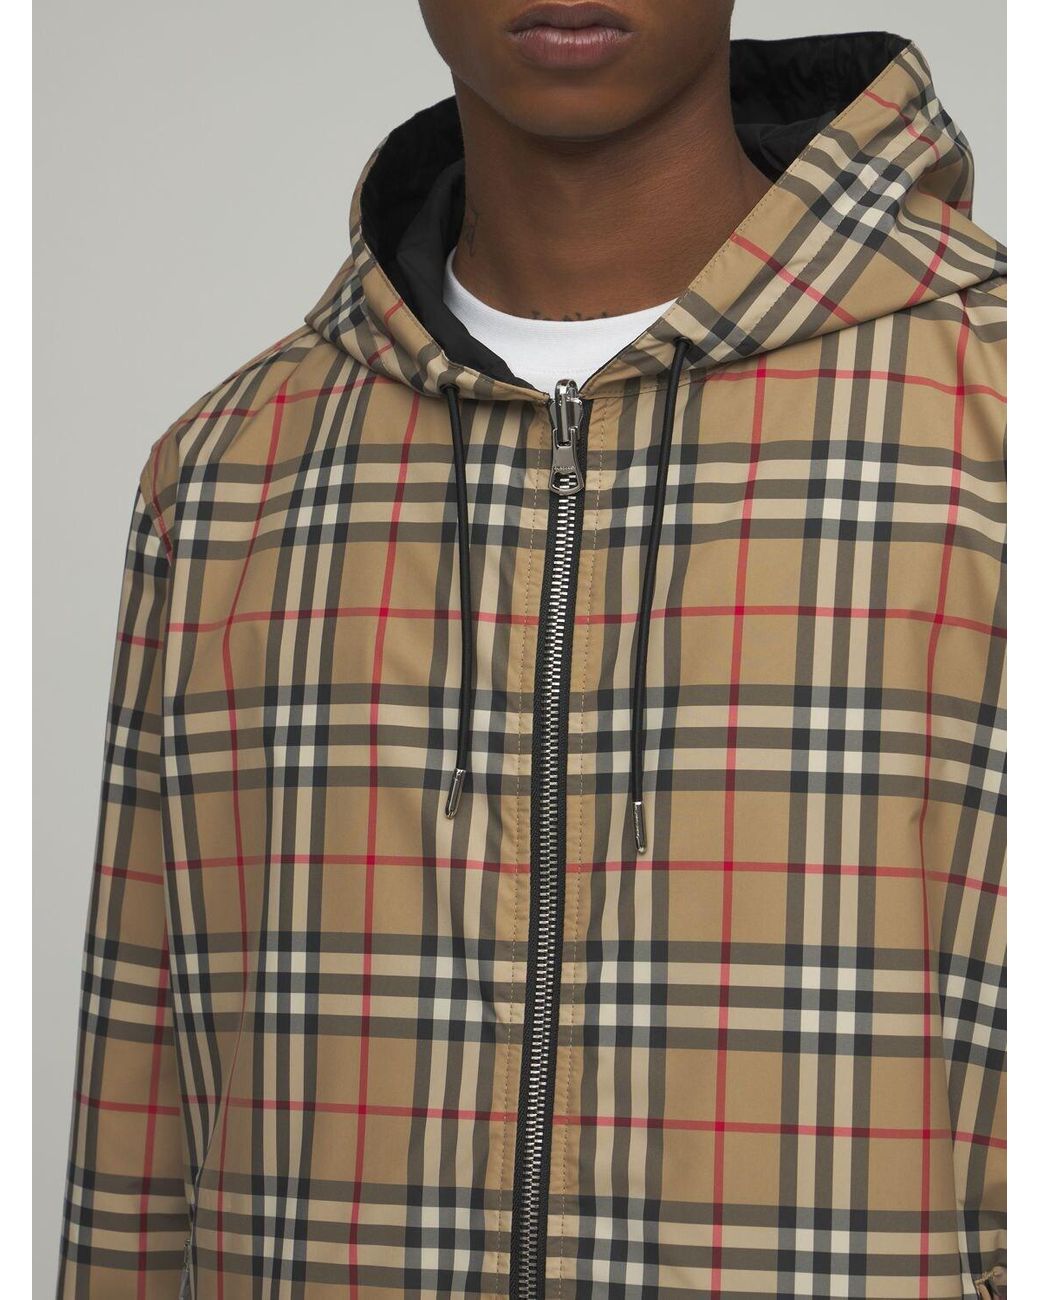 Burberry Stretton Reversible Check Zip Jacket in Natural for Men | Lyst UK